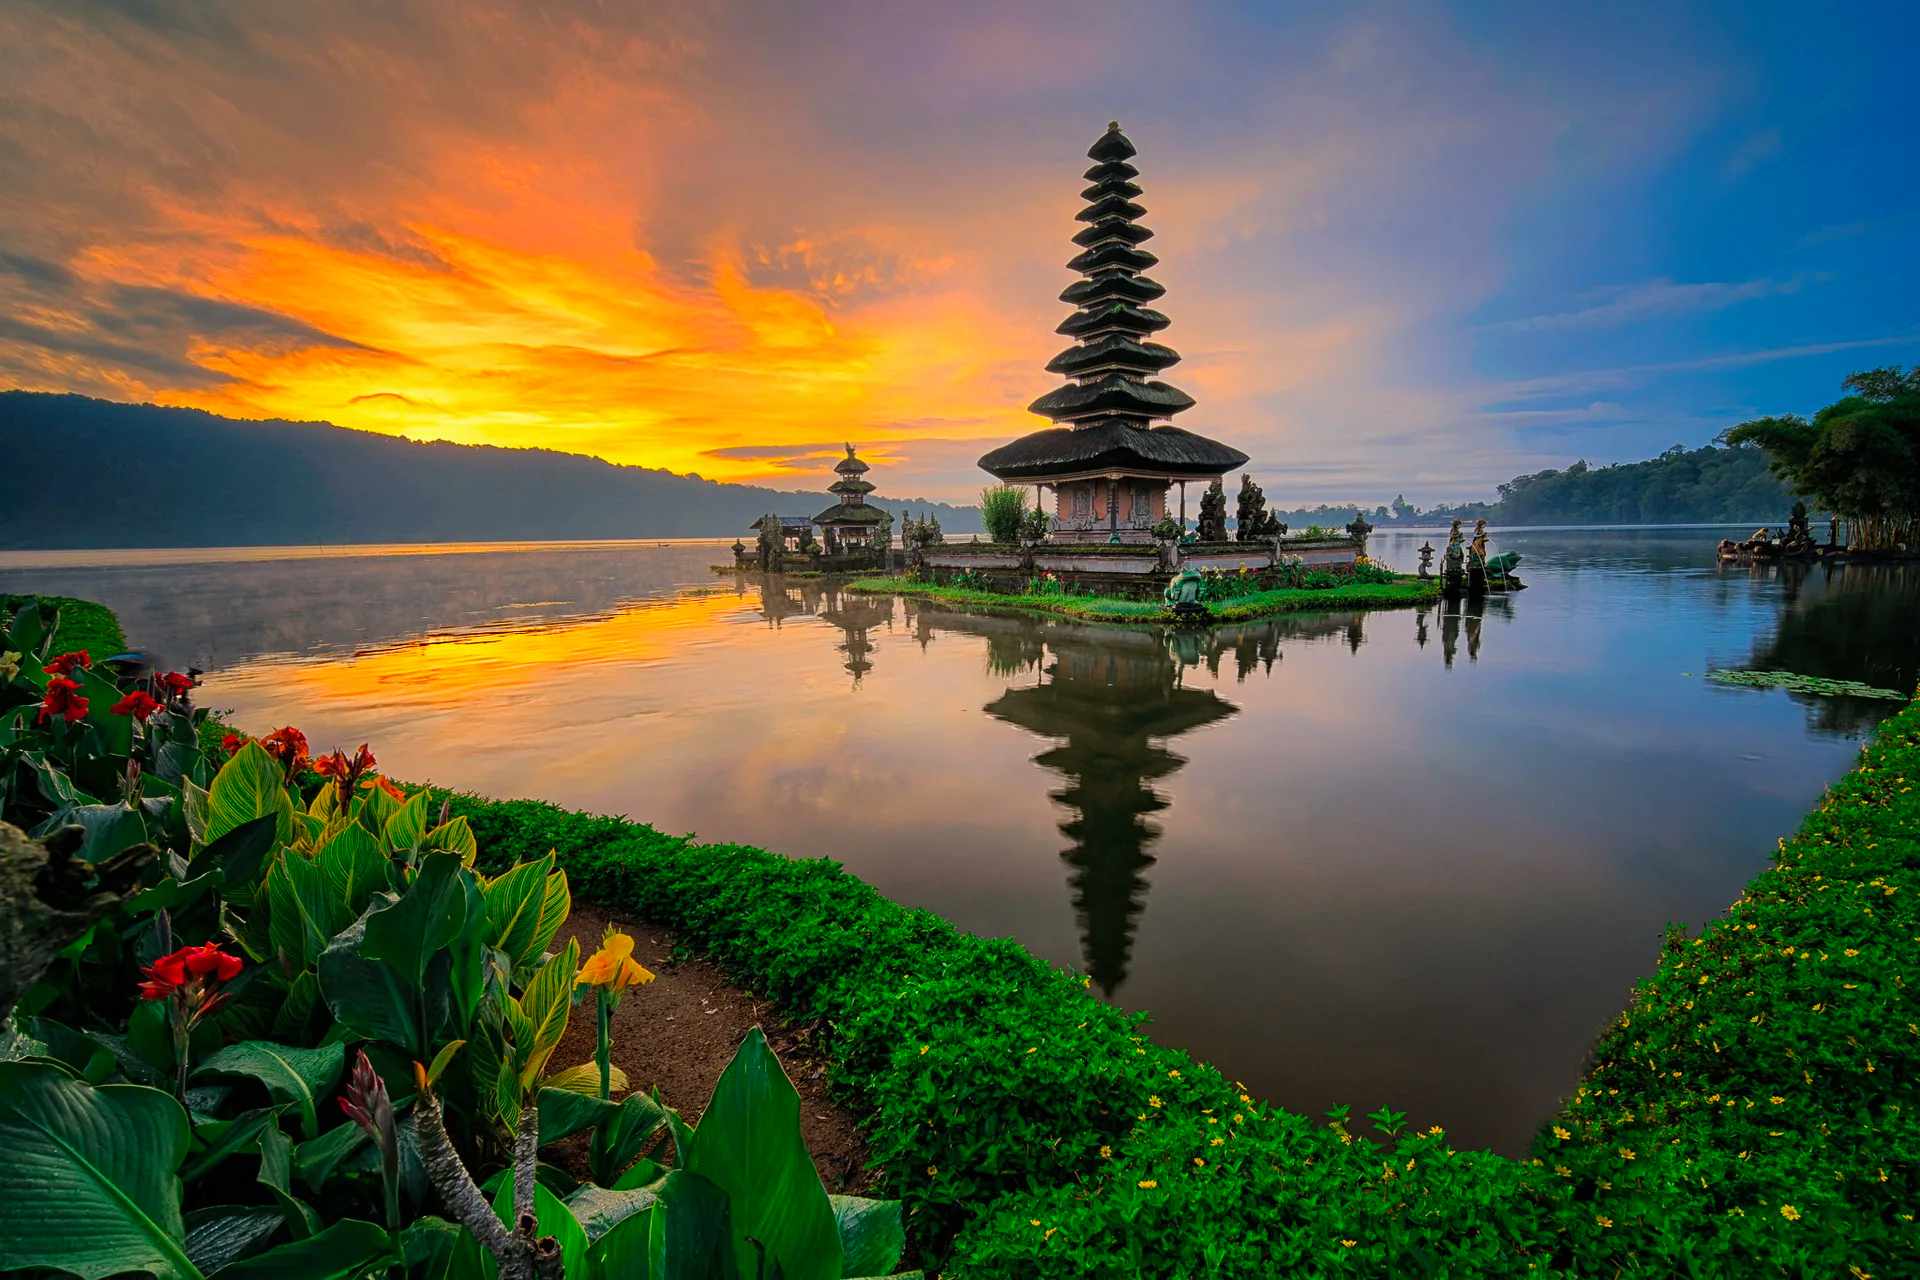 How To Open a Business in Bali? book